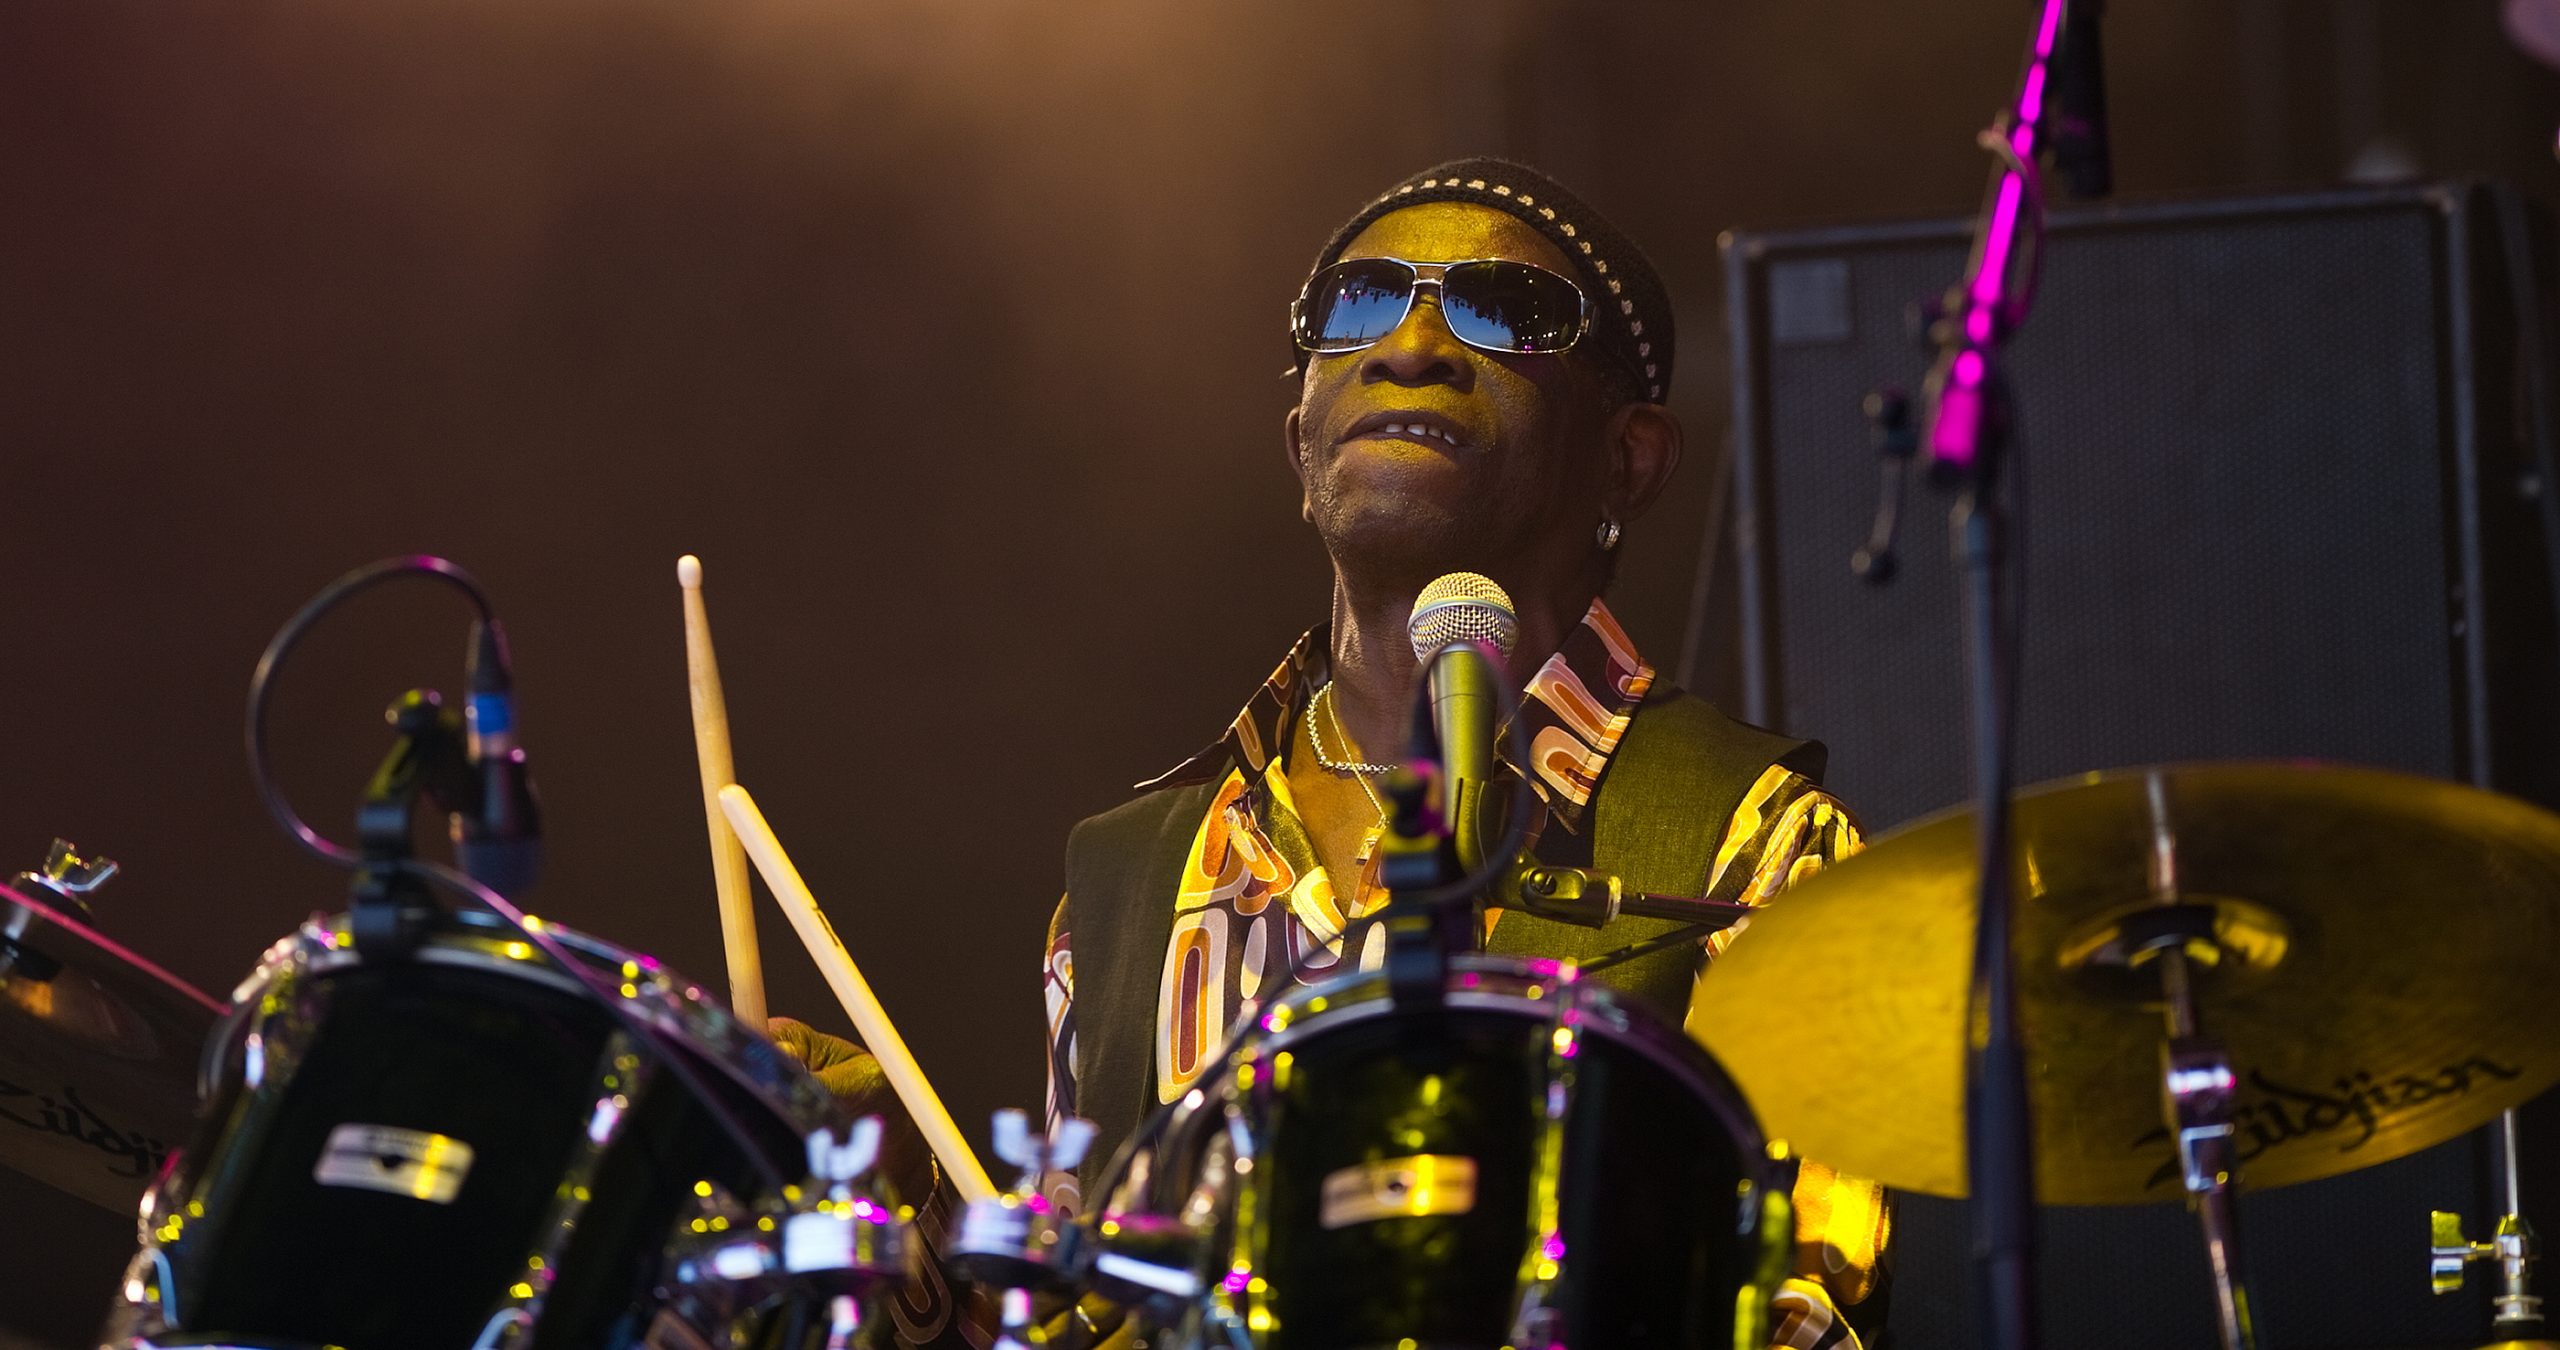 Tony Allen The ‘World’s greatest drummer’ and afrobeat pioneer died of a heart attack